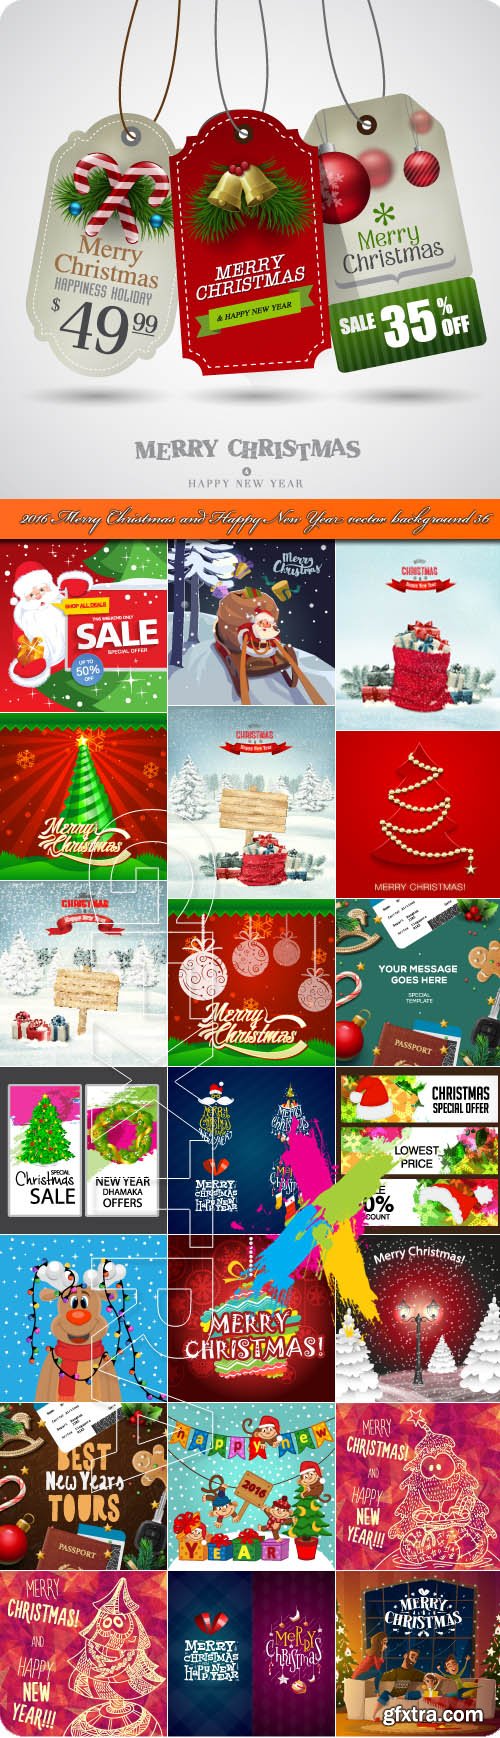 2016 Merry Christmas and Happy New Year vector background 36